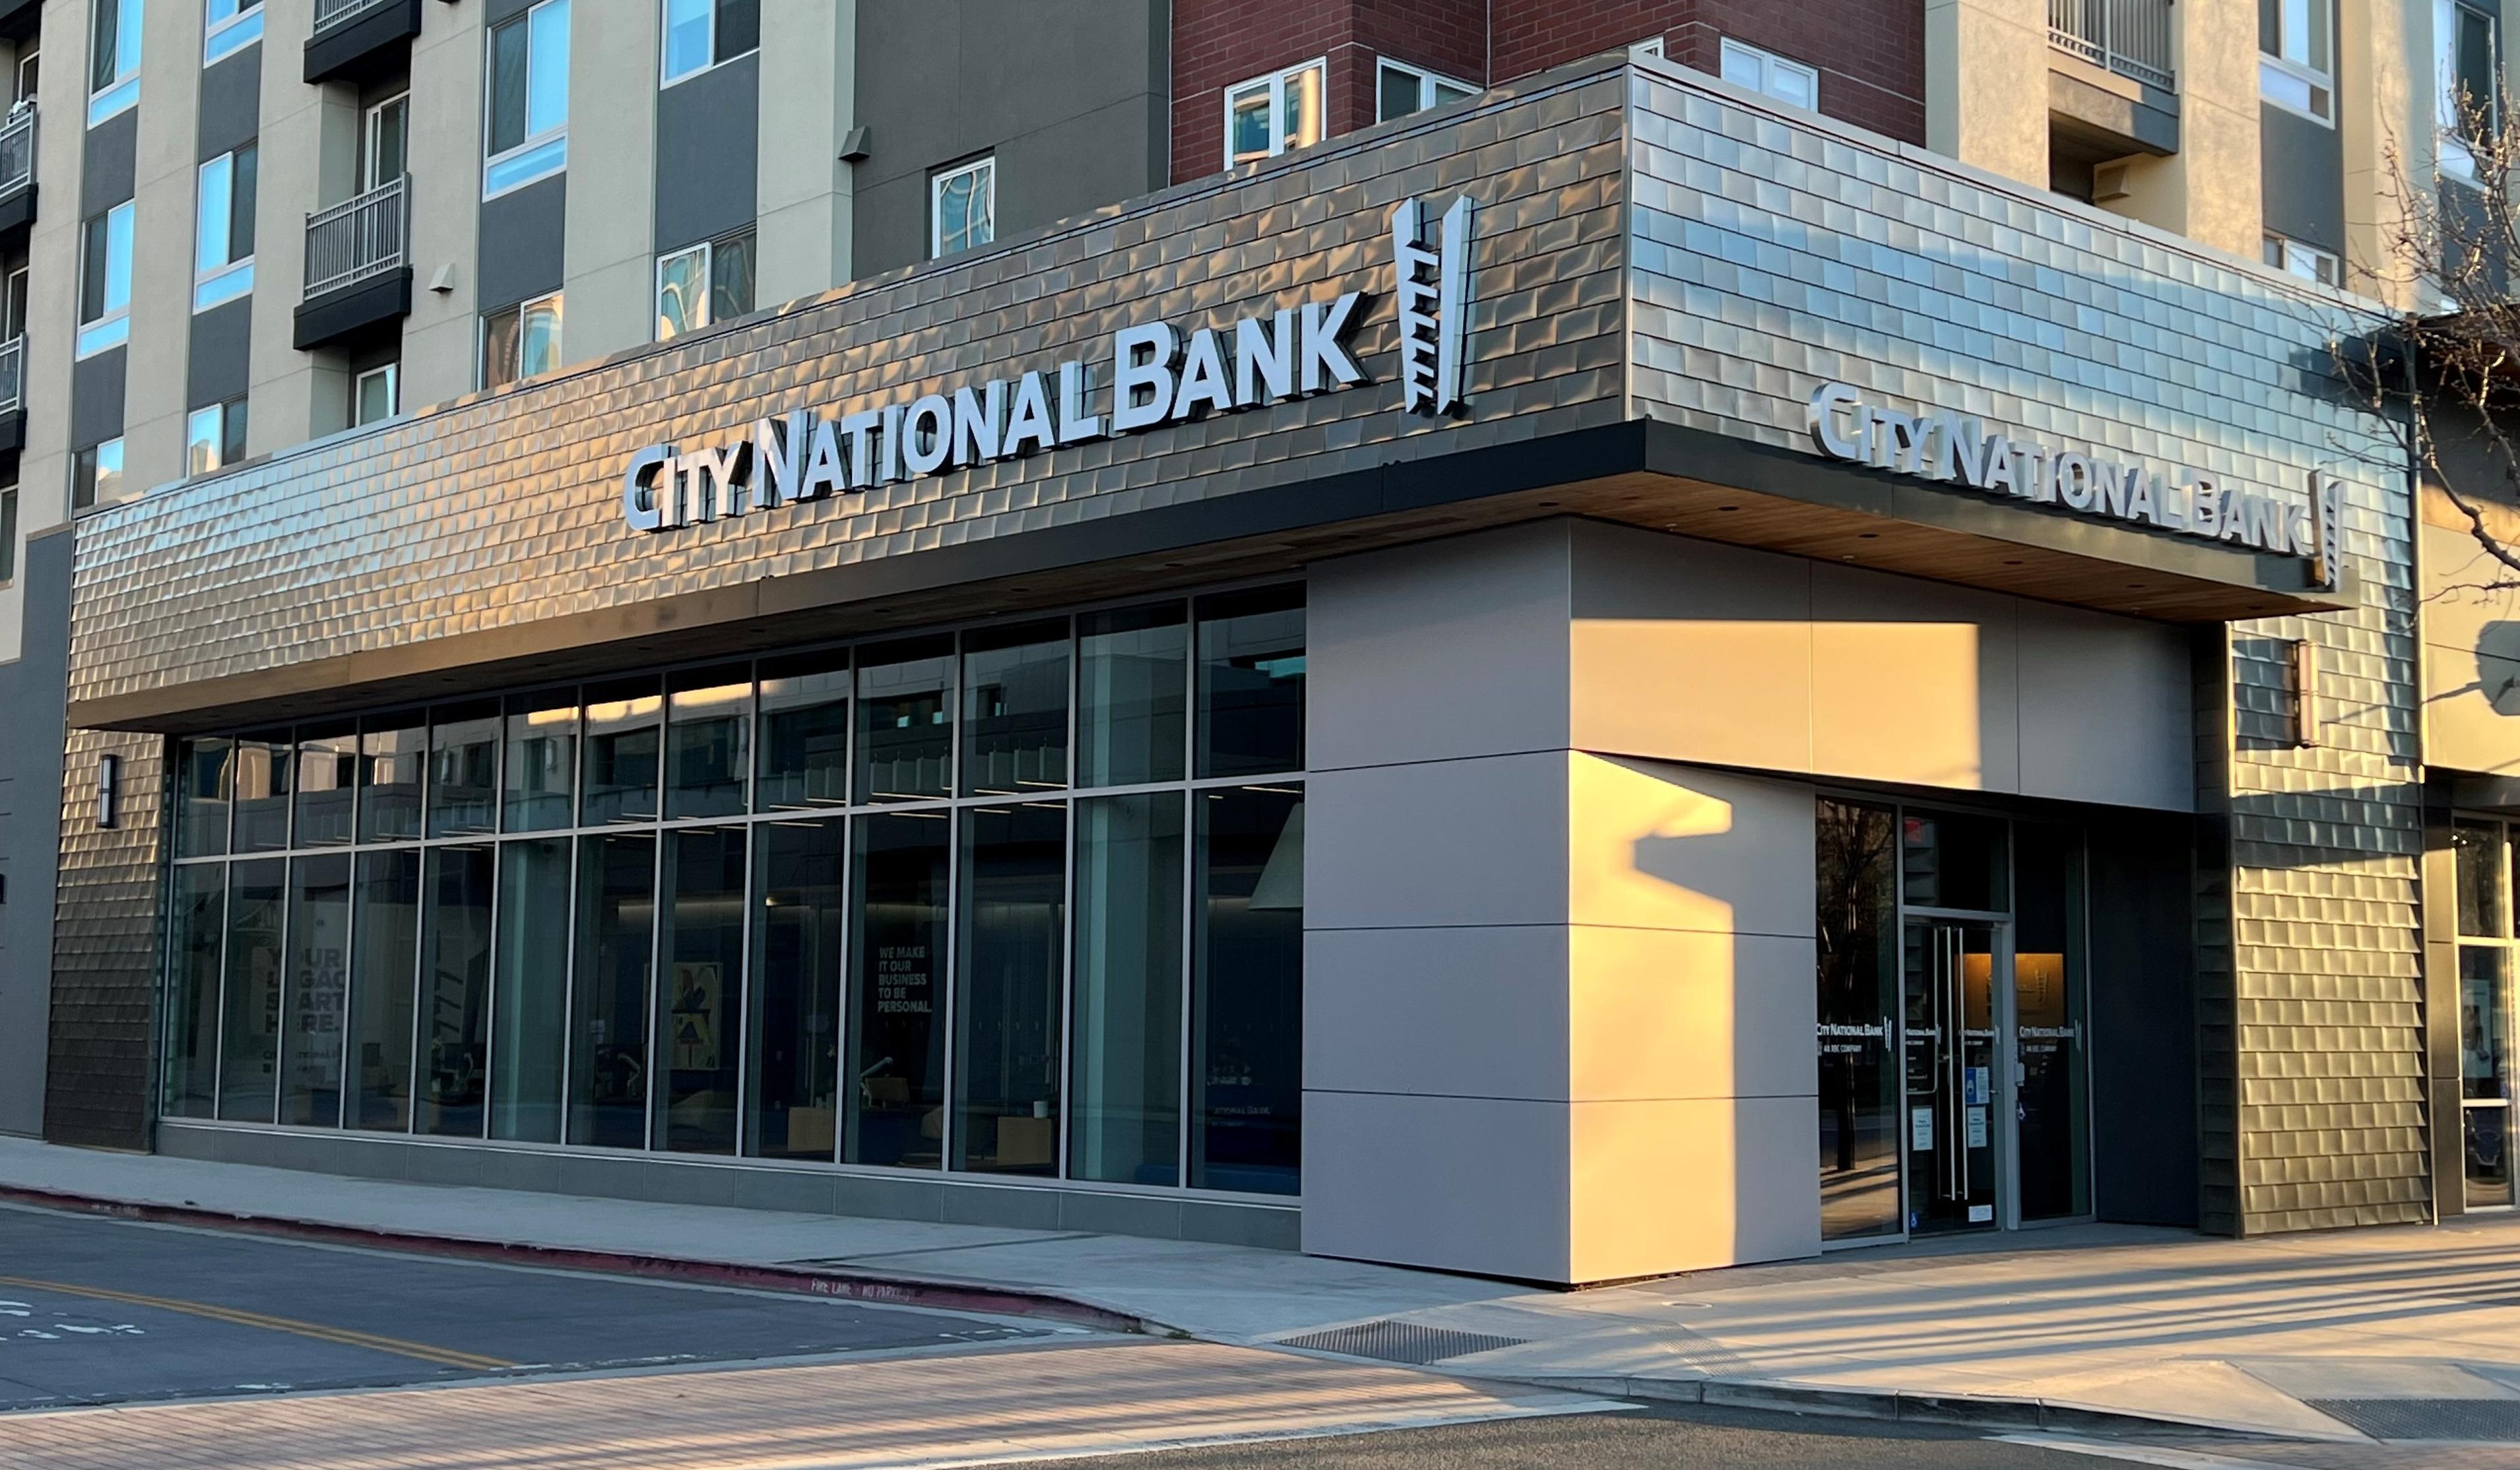 City National Bank branch in Sunnyvale. City National Bank Sunnyvale (408)962-3400